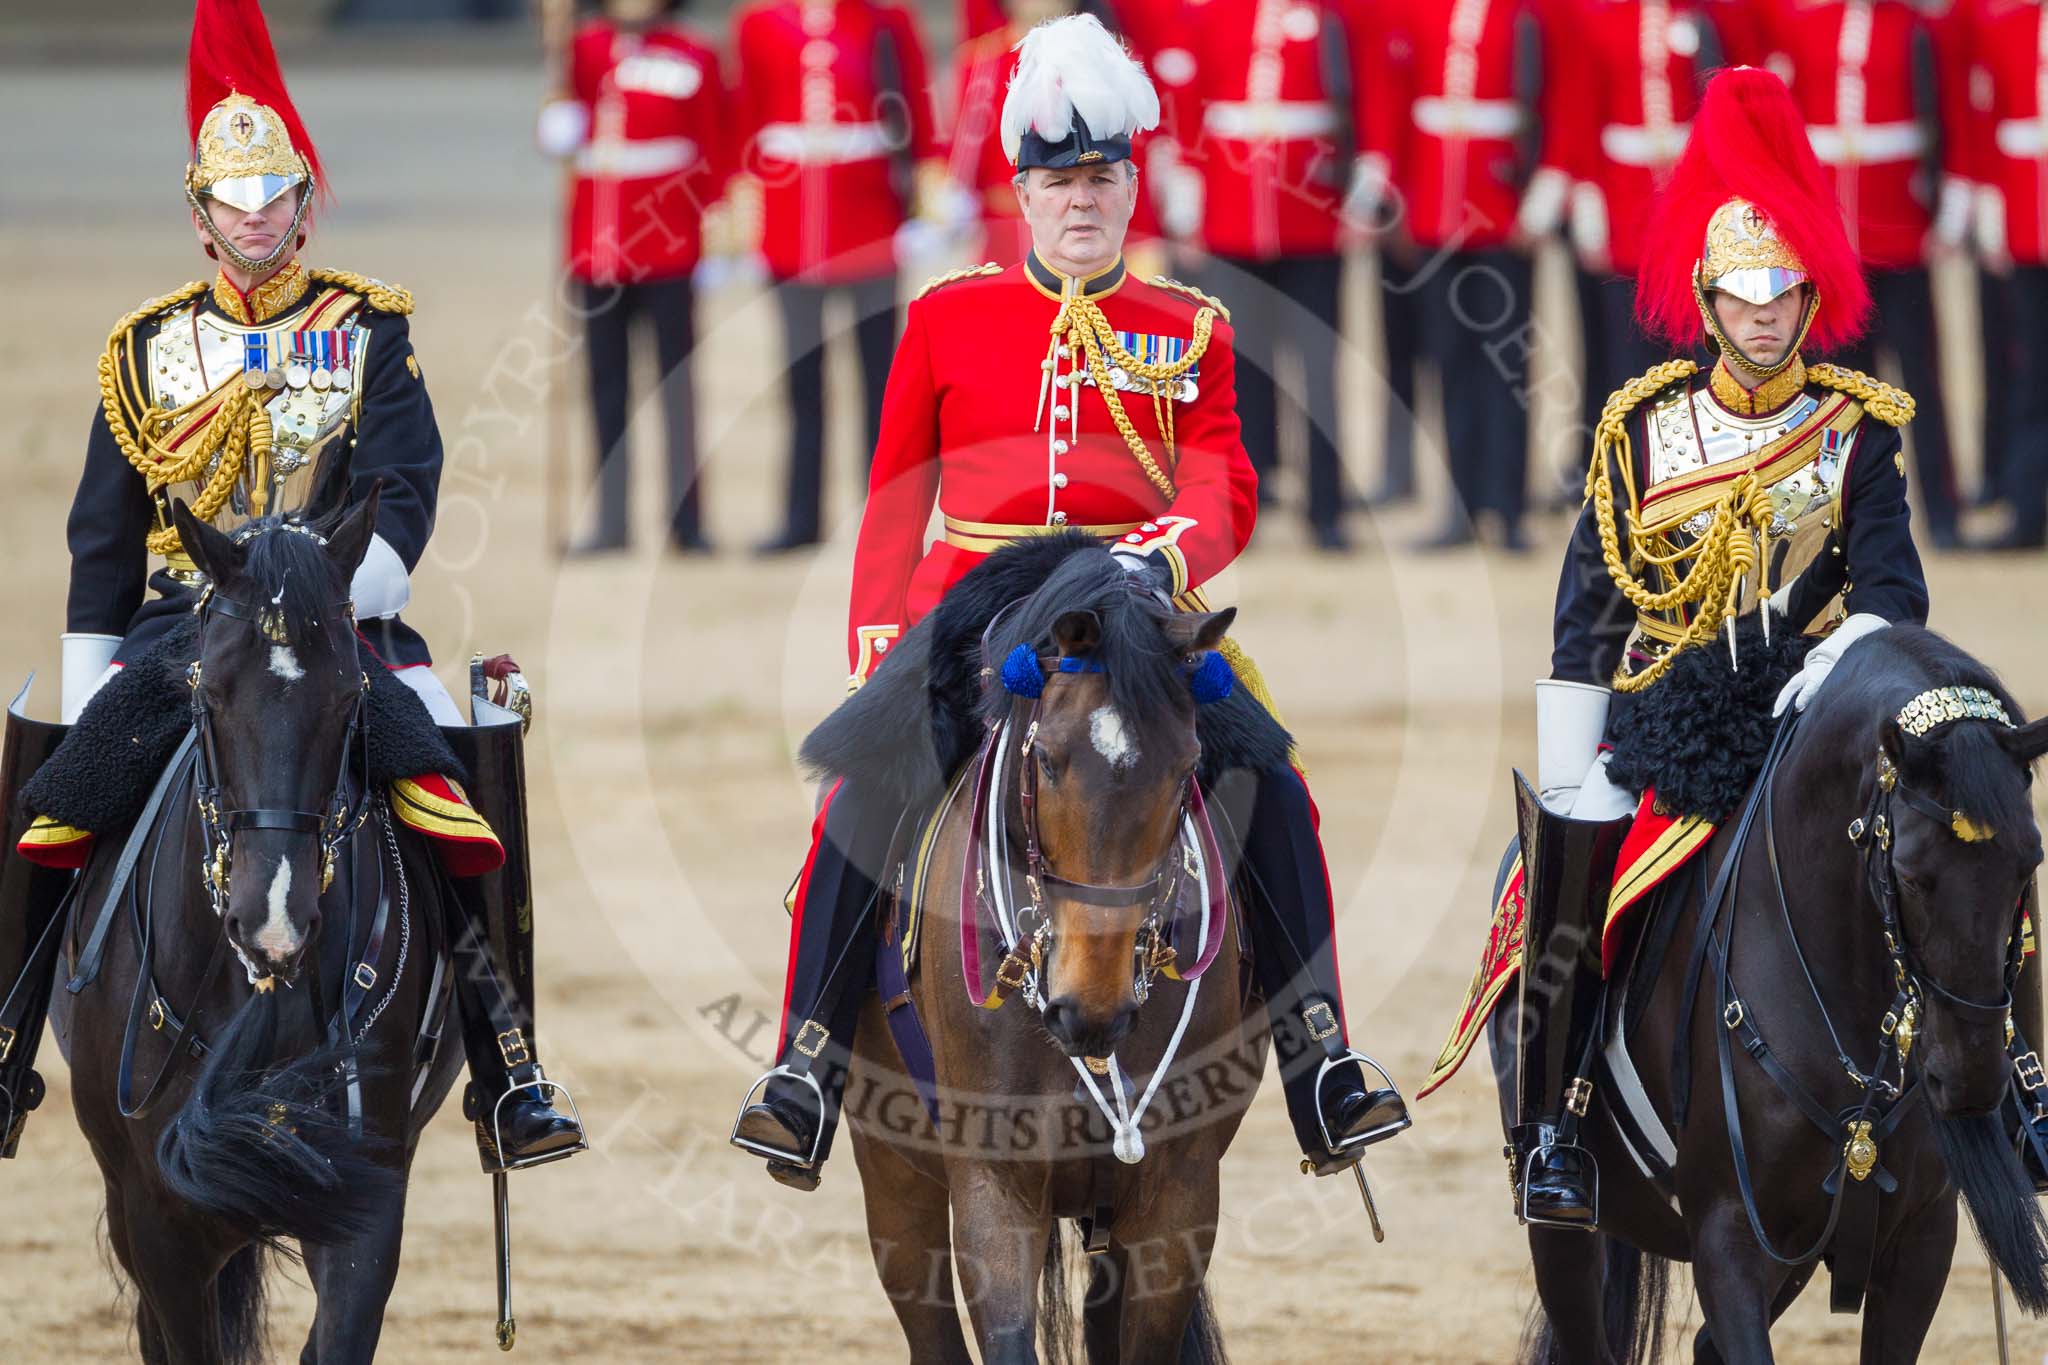 The Colonel's Review 2015.
Horse Guards Parade, Westminster,
London,

United Kingdom,
on 06 June 2015 at 11:05, image #237